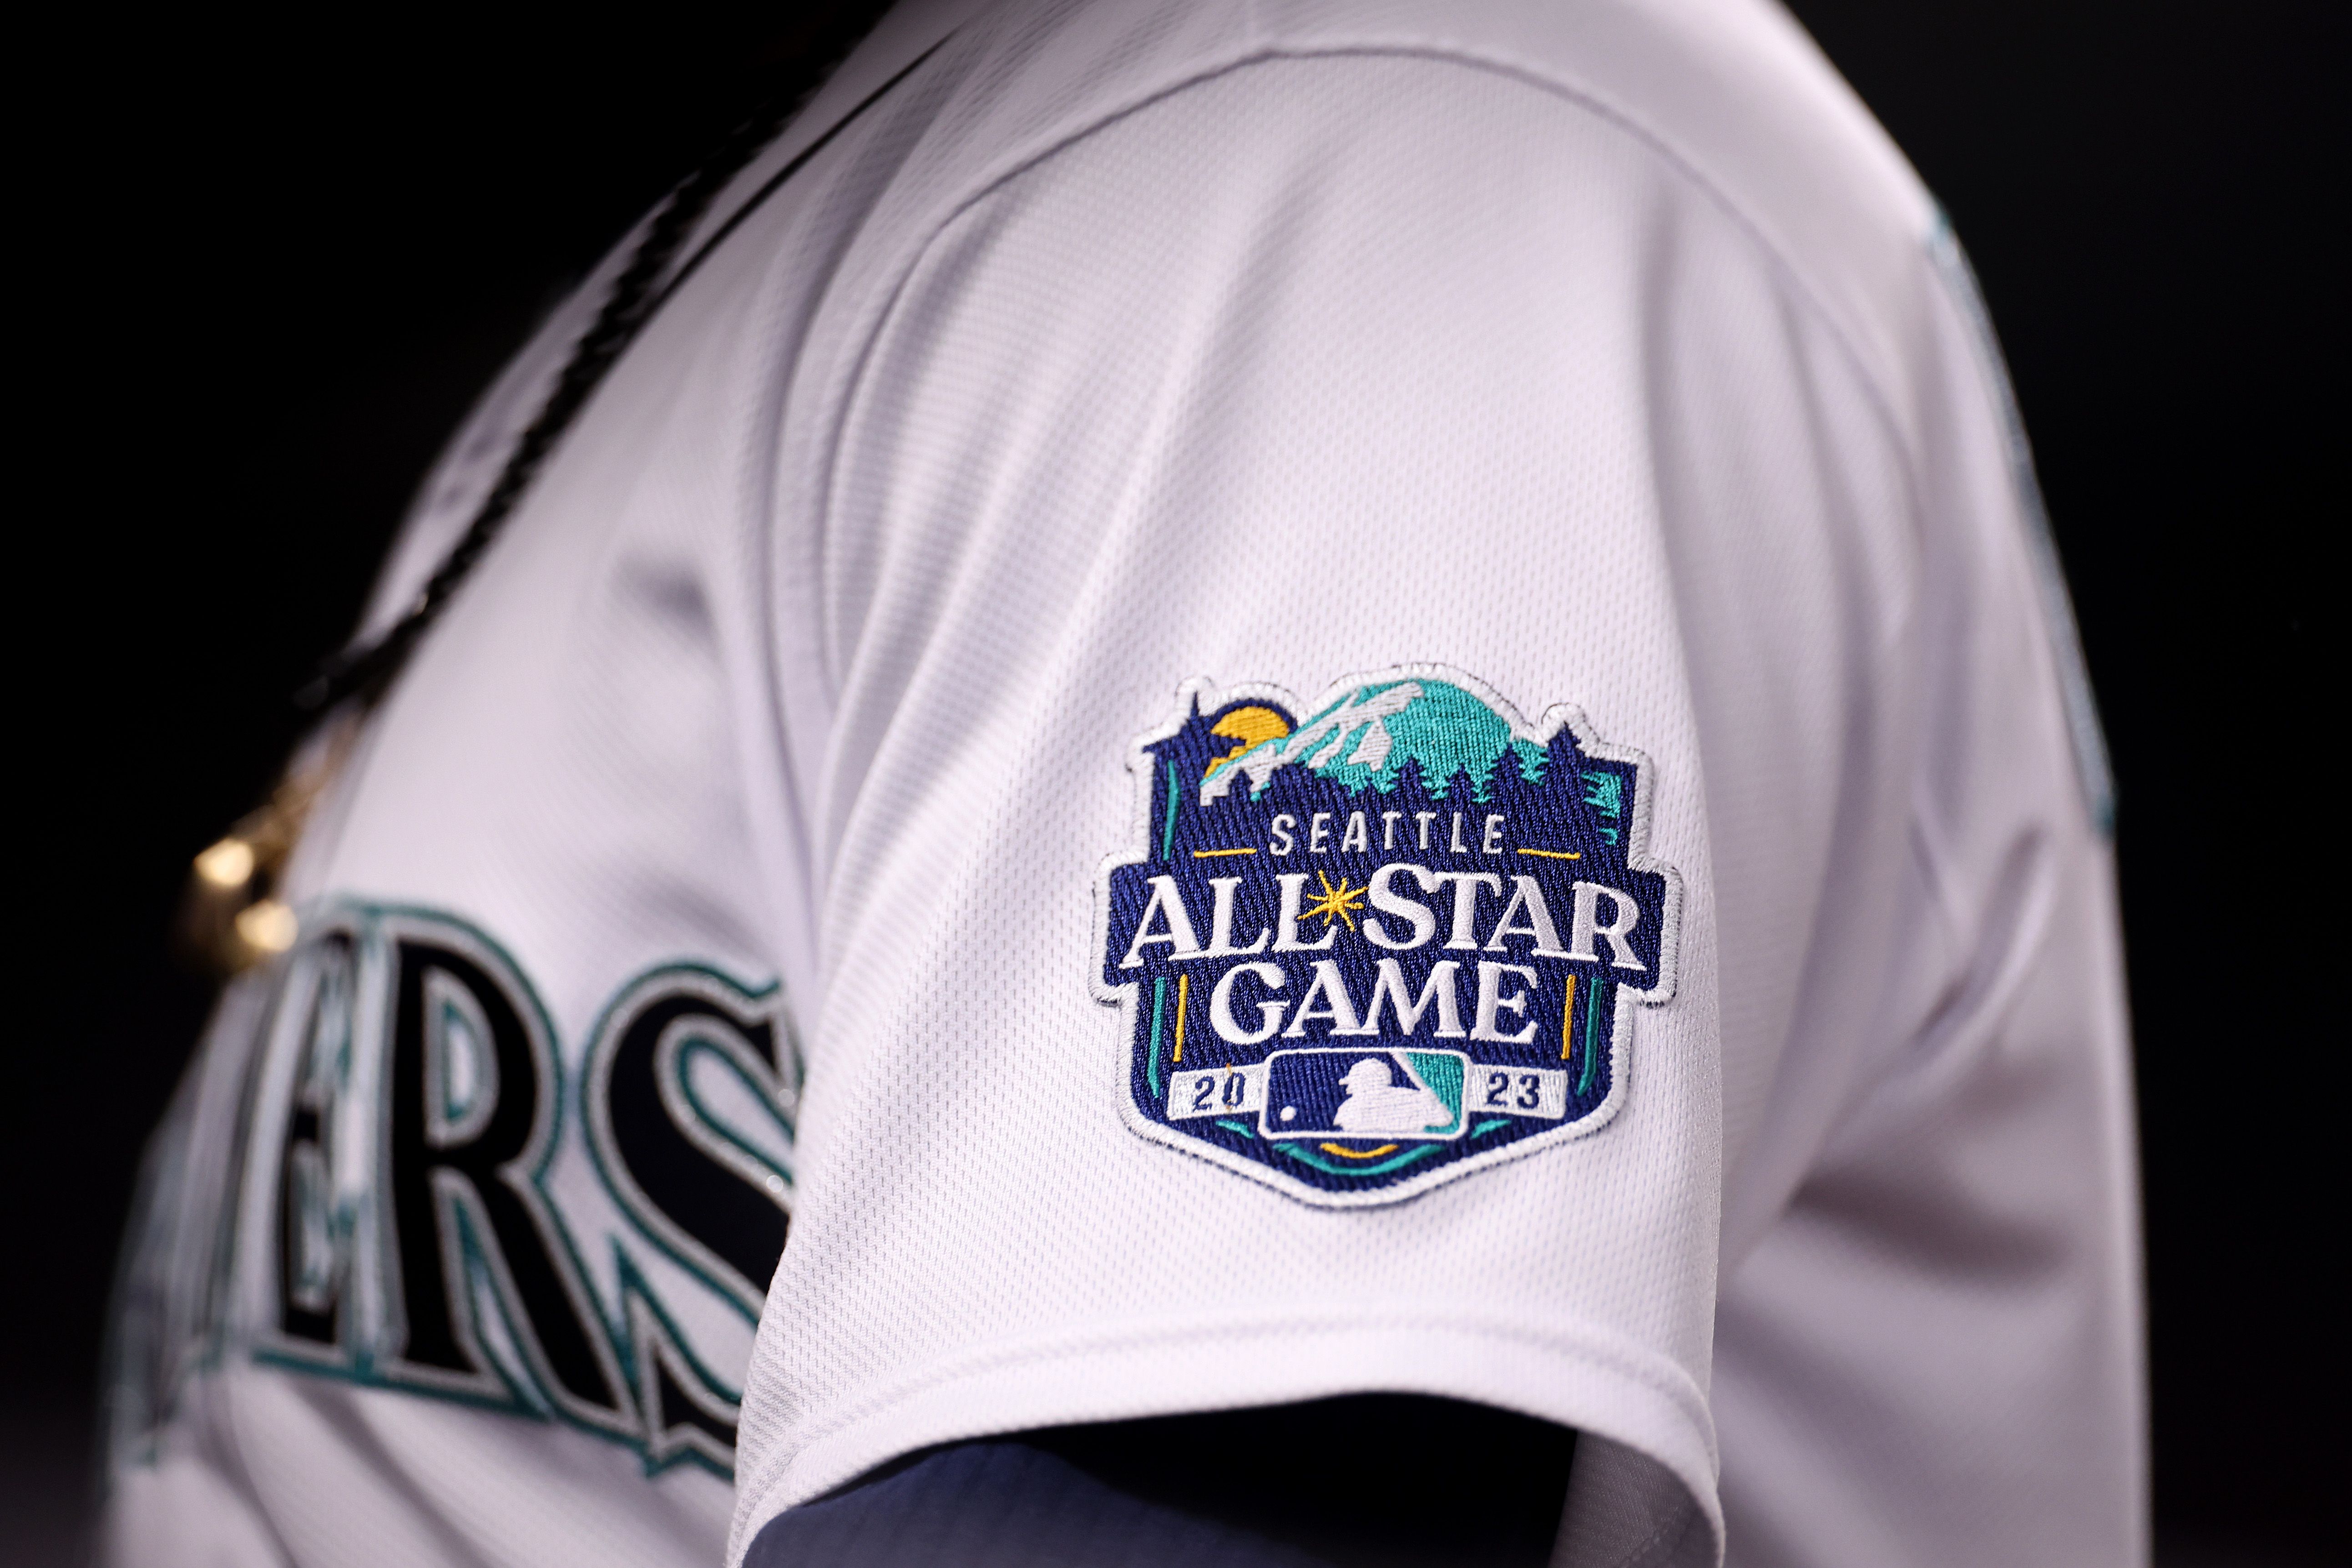 Seattle Mariners rumor: Total rebrand with new logos and uniforms